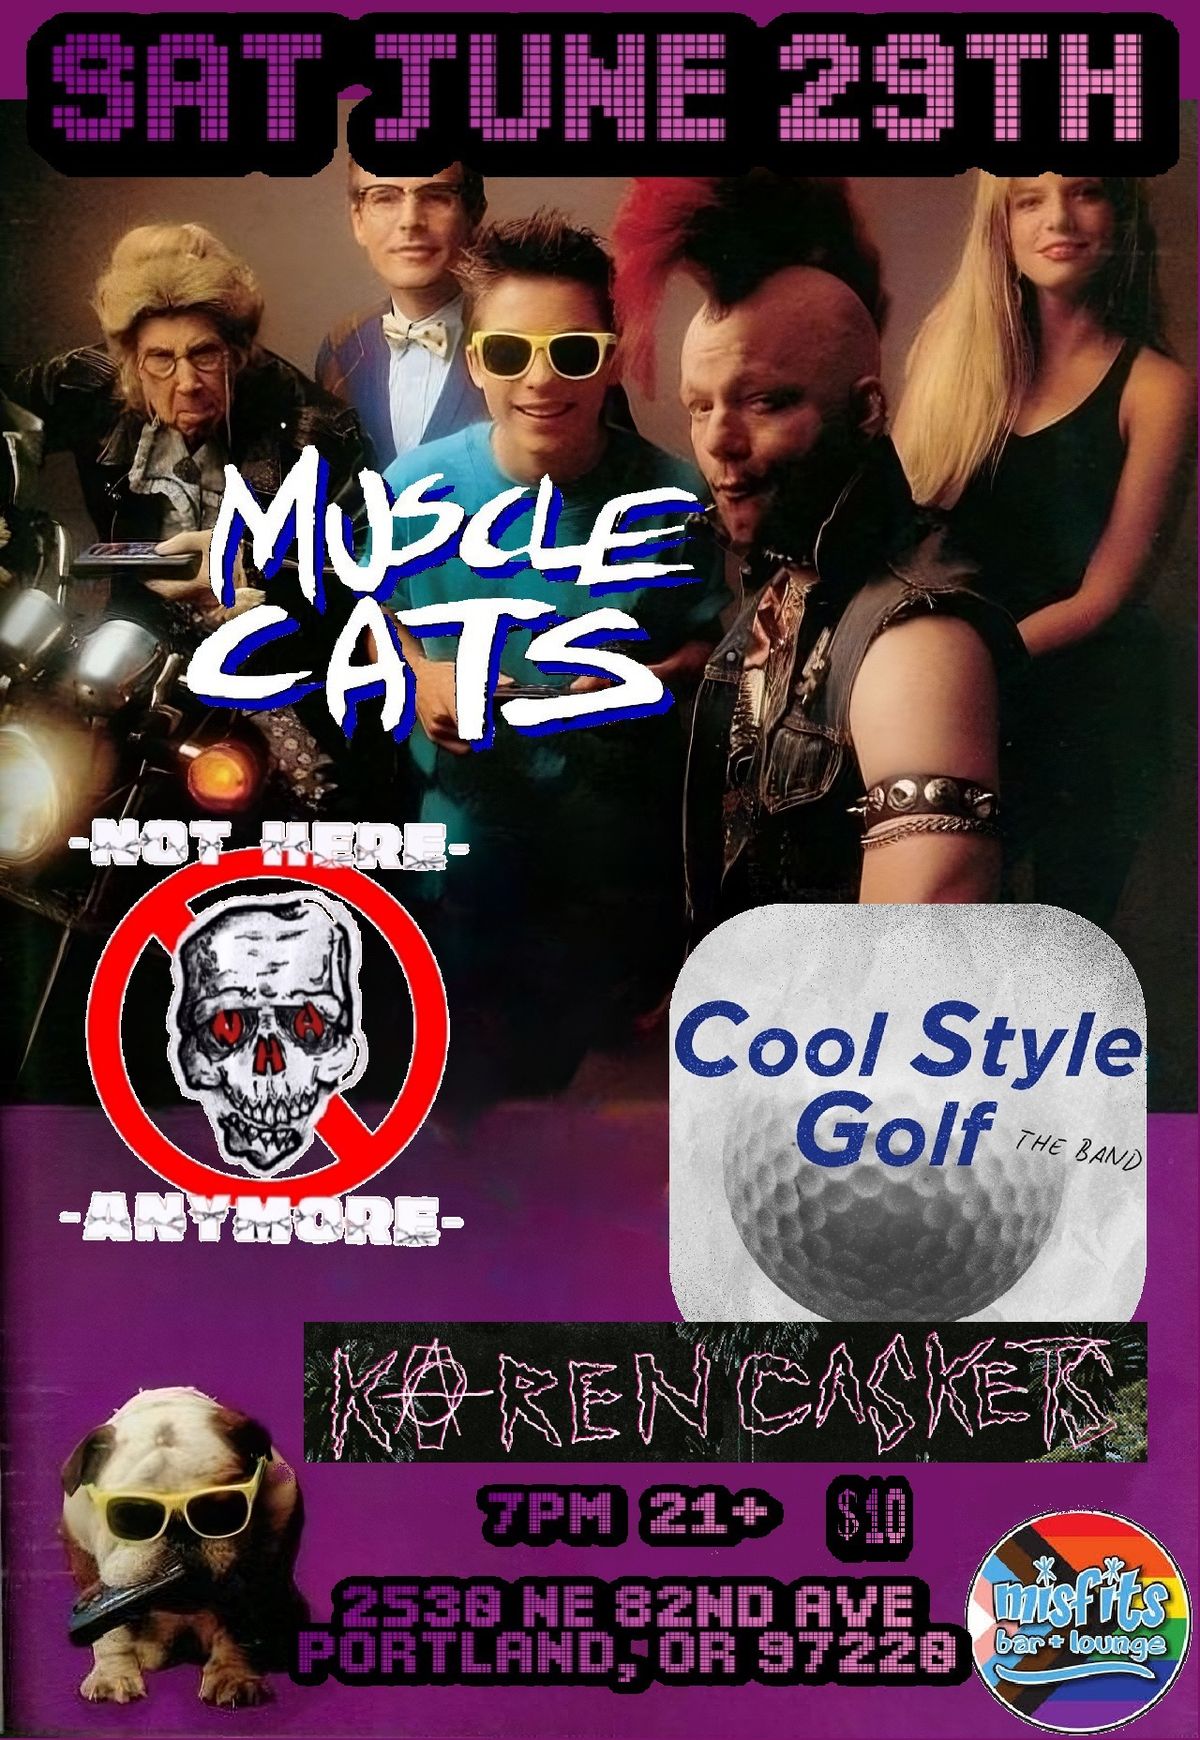 Muscle Cats, Karen Caskets, Not Here Anymore, + Cool Style Golf